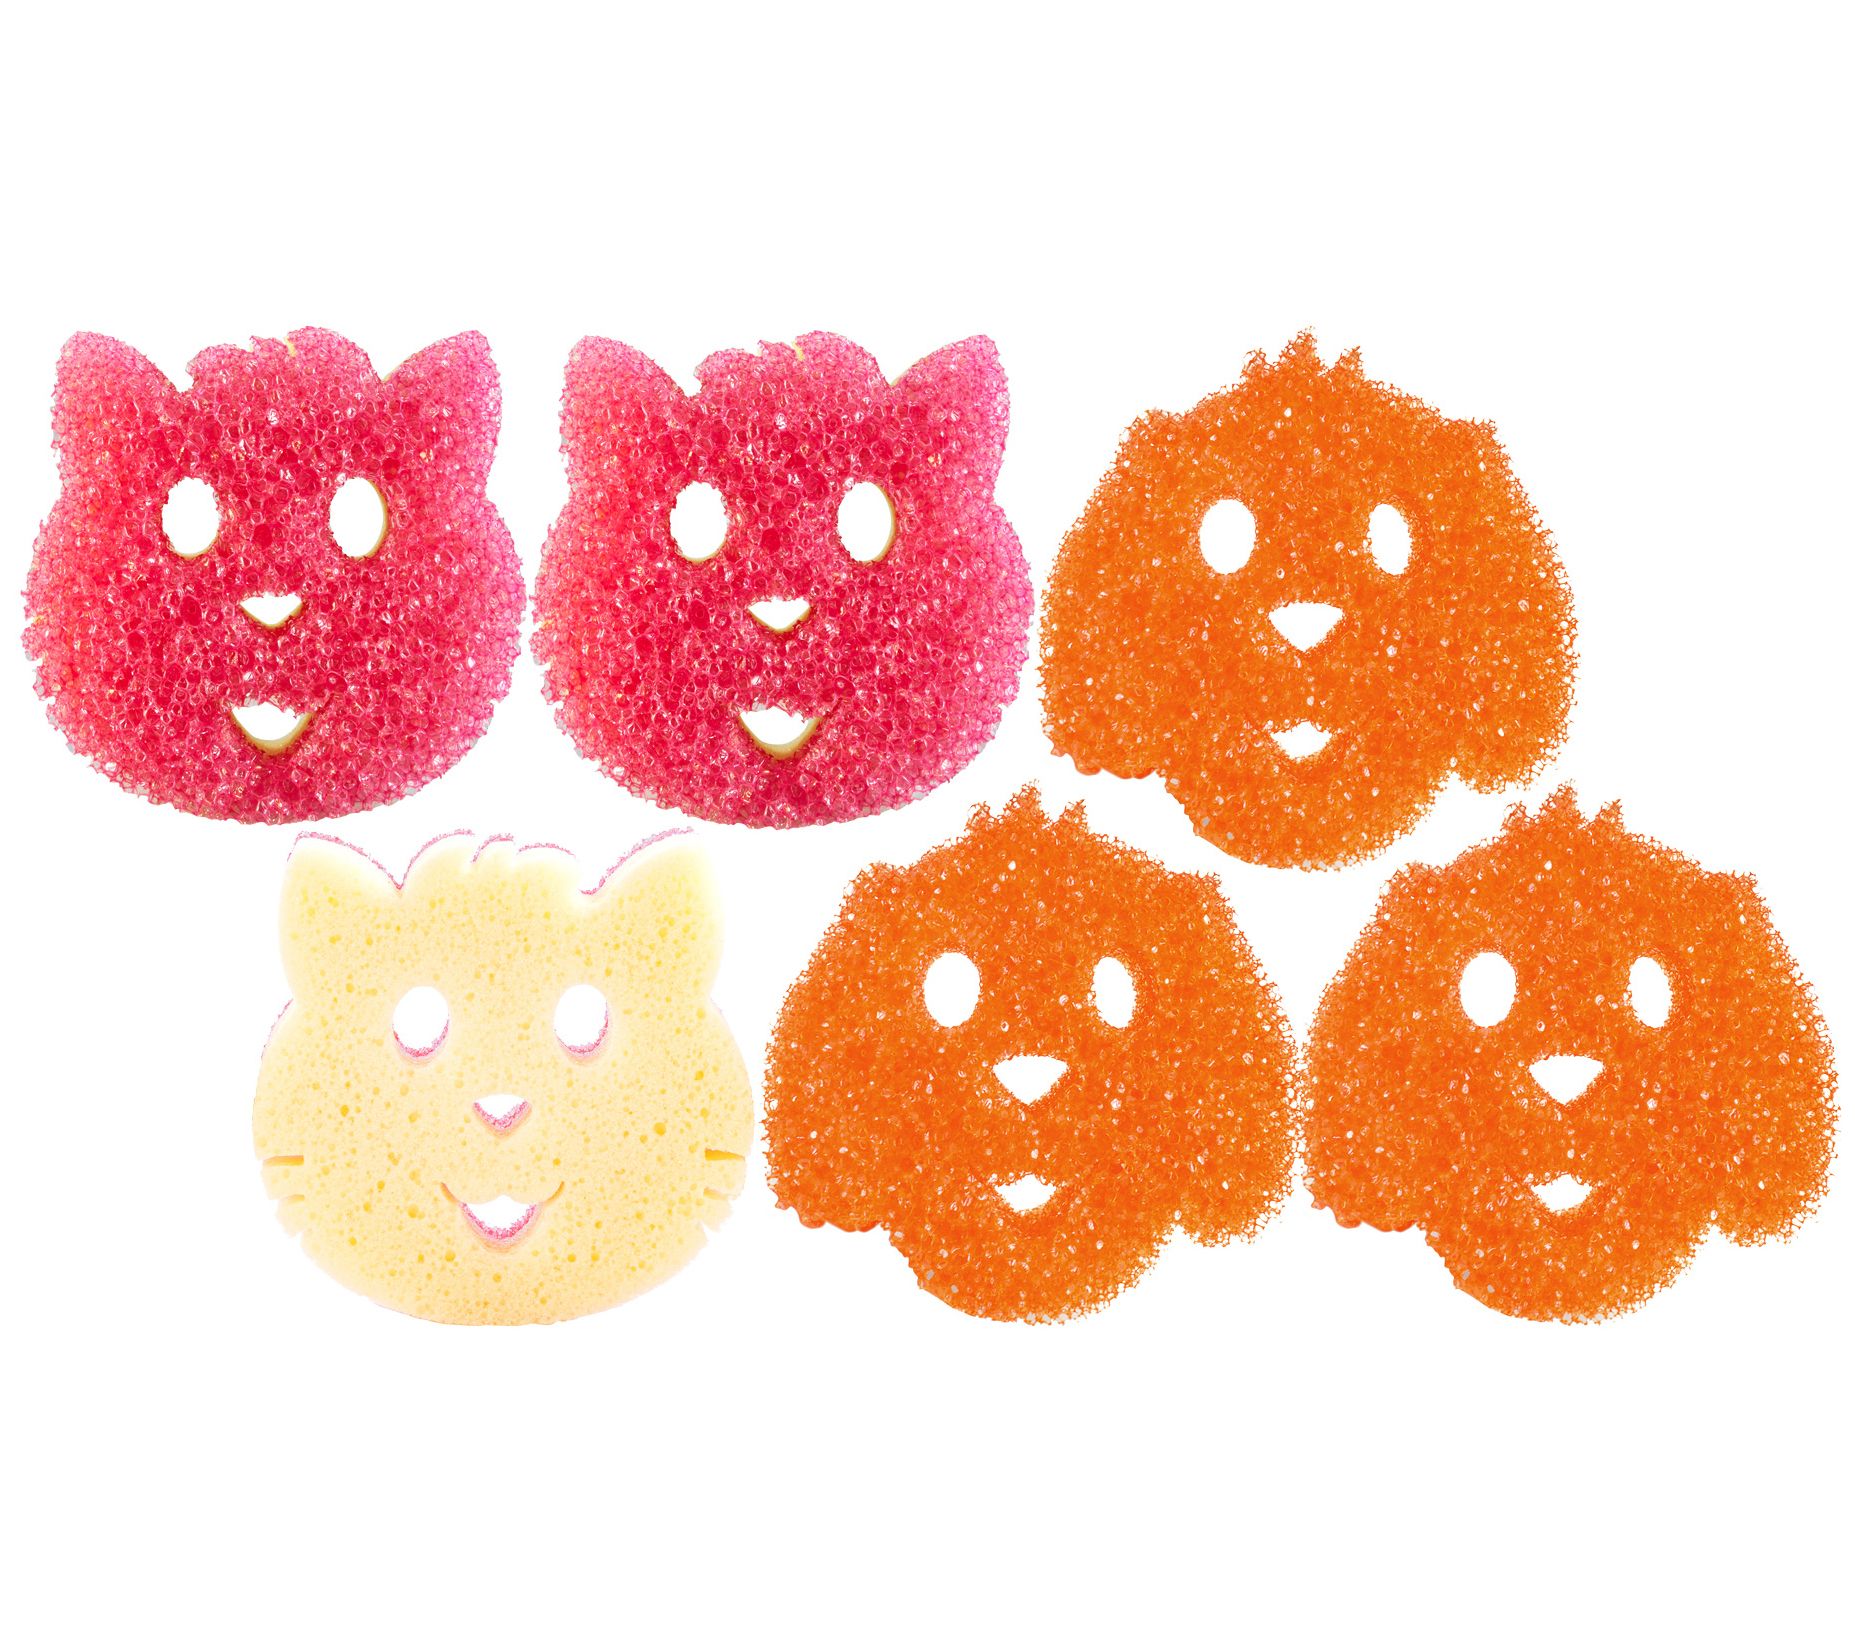 Scrub Daddy Puppy & Kitty 6-Pack Just $18.59 Shipped (Only $3.10 Each!)